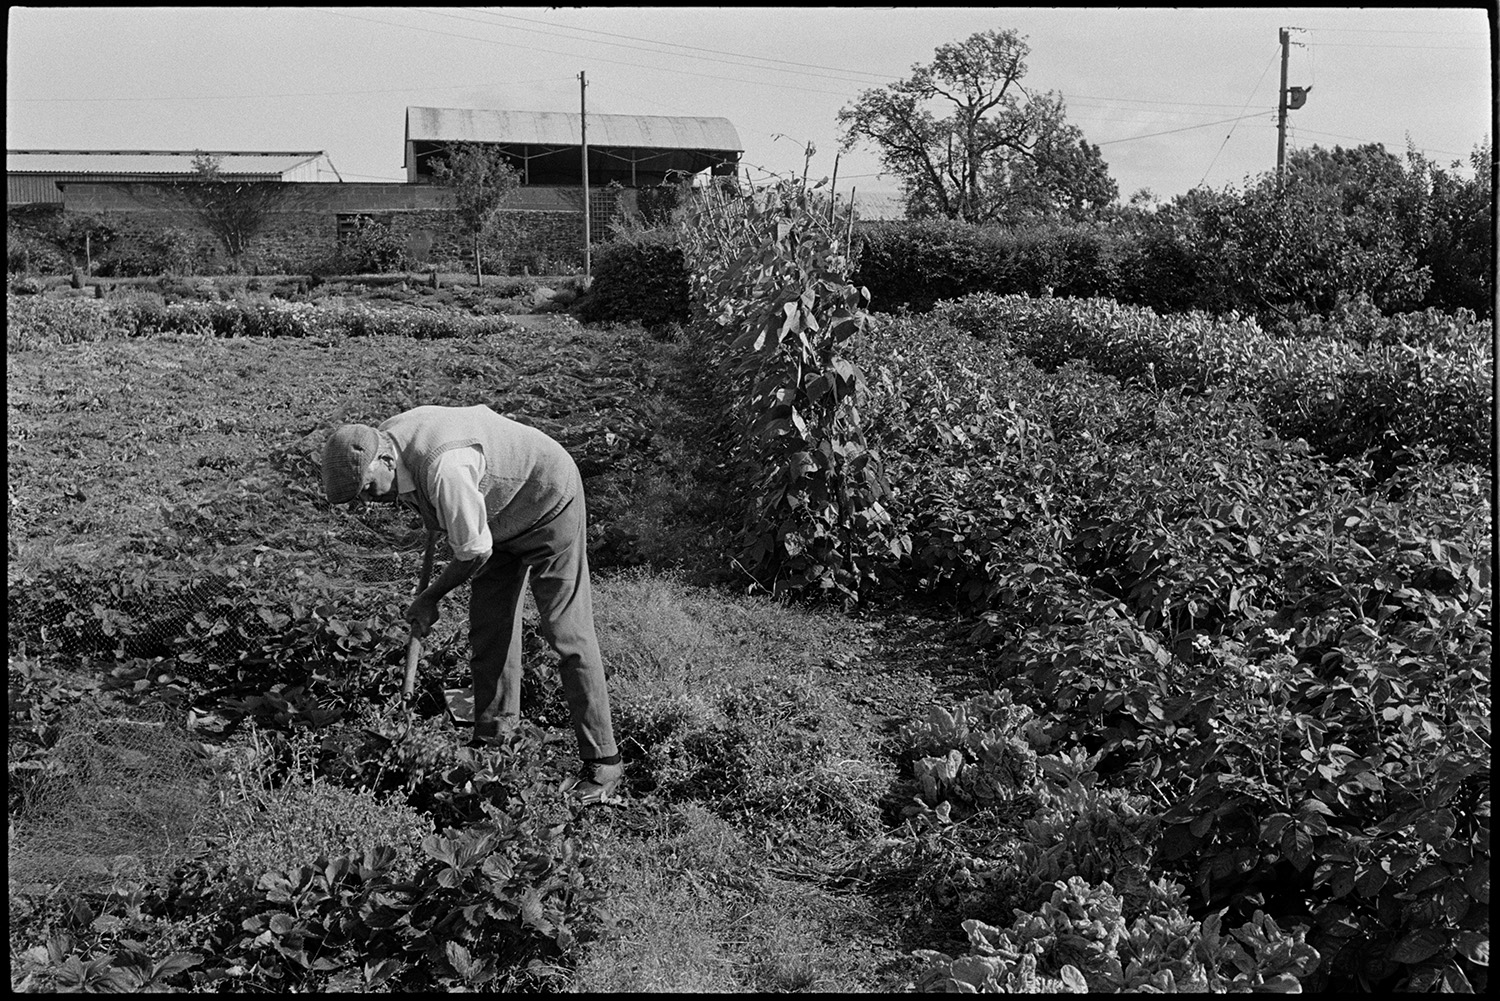 Man hoeing his garden.
[A man hoeing his garden at Rashleigh Barton, Chulmleigh. Barns can be seen in the background. It was later bought by Lord O'Hagan.]